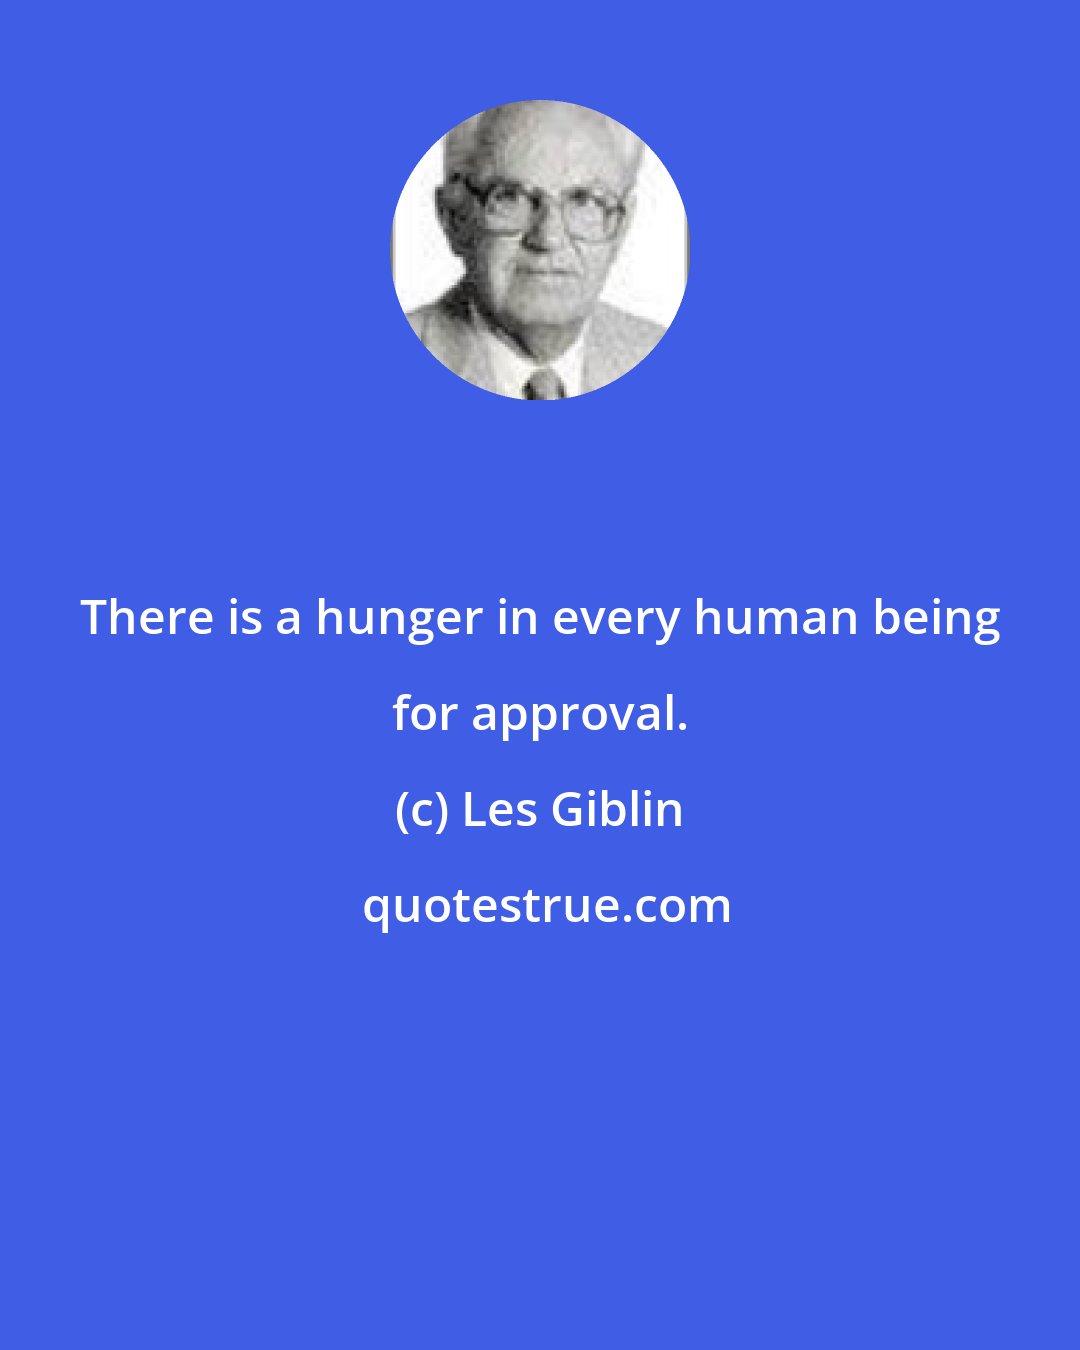 Les Giblin: There is a hunger in every human being for approval.